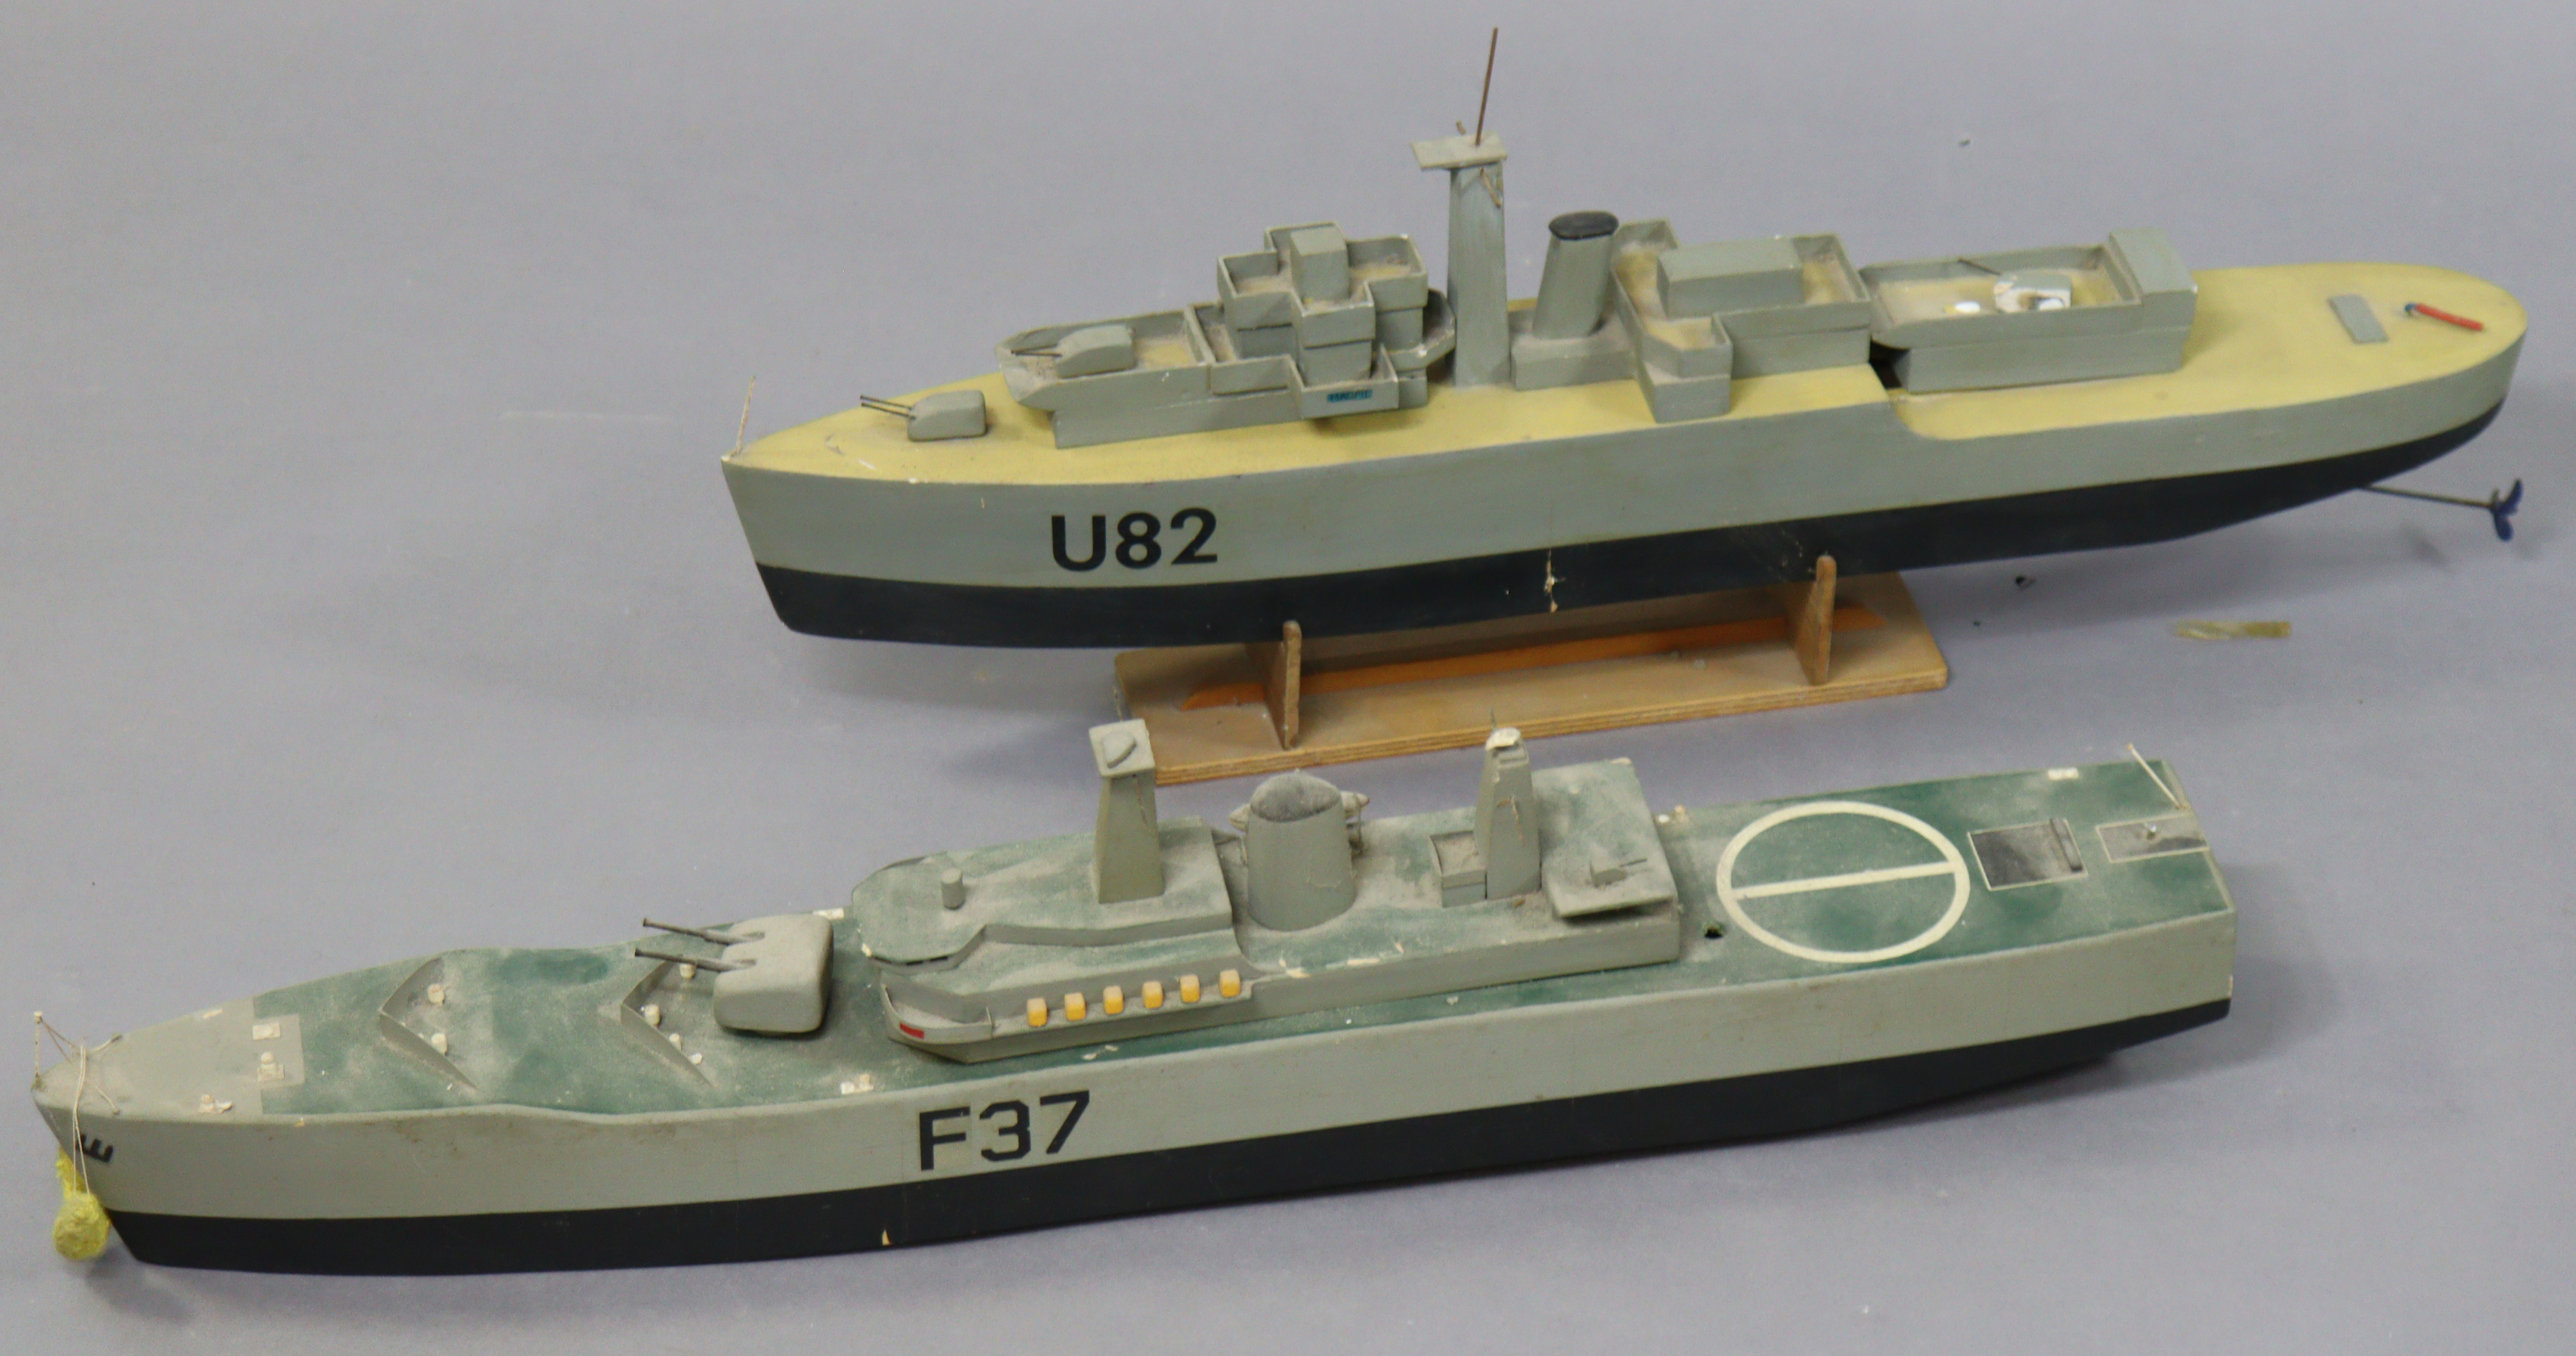 Two painted fibreglass models of warships “F37” 75cm long, and “V82” 70cm long.